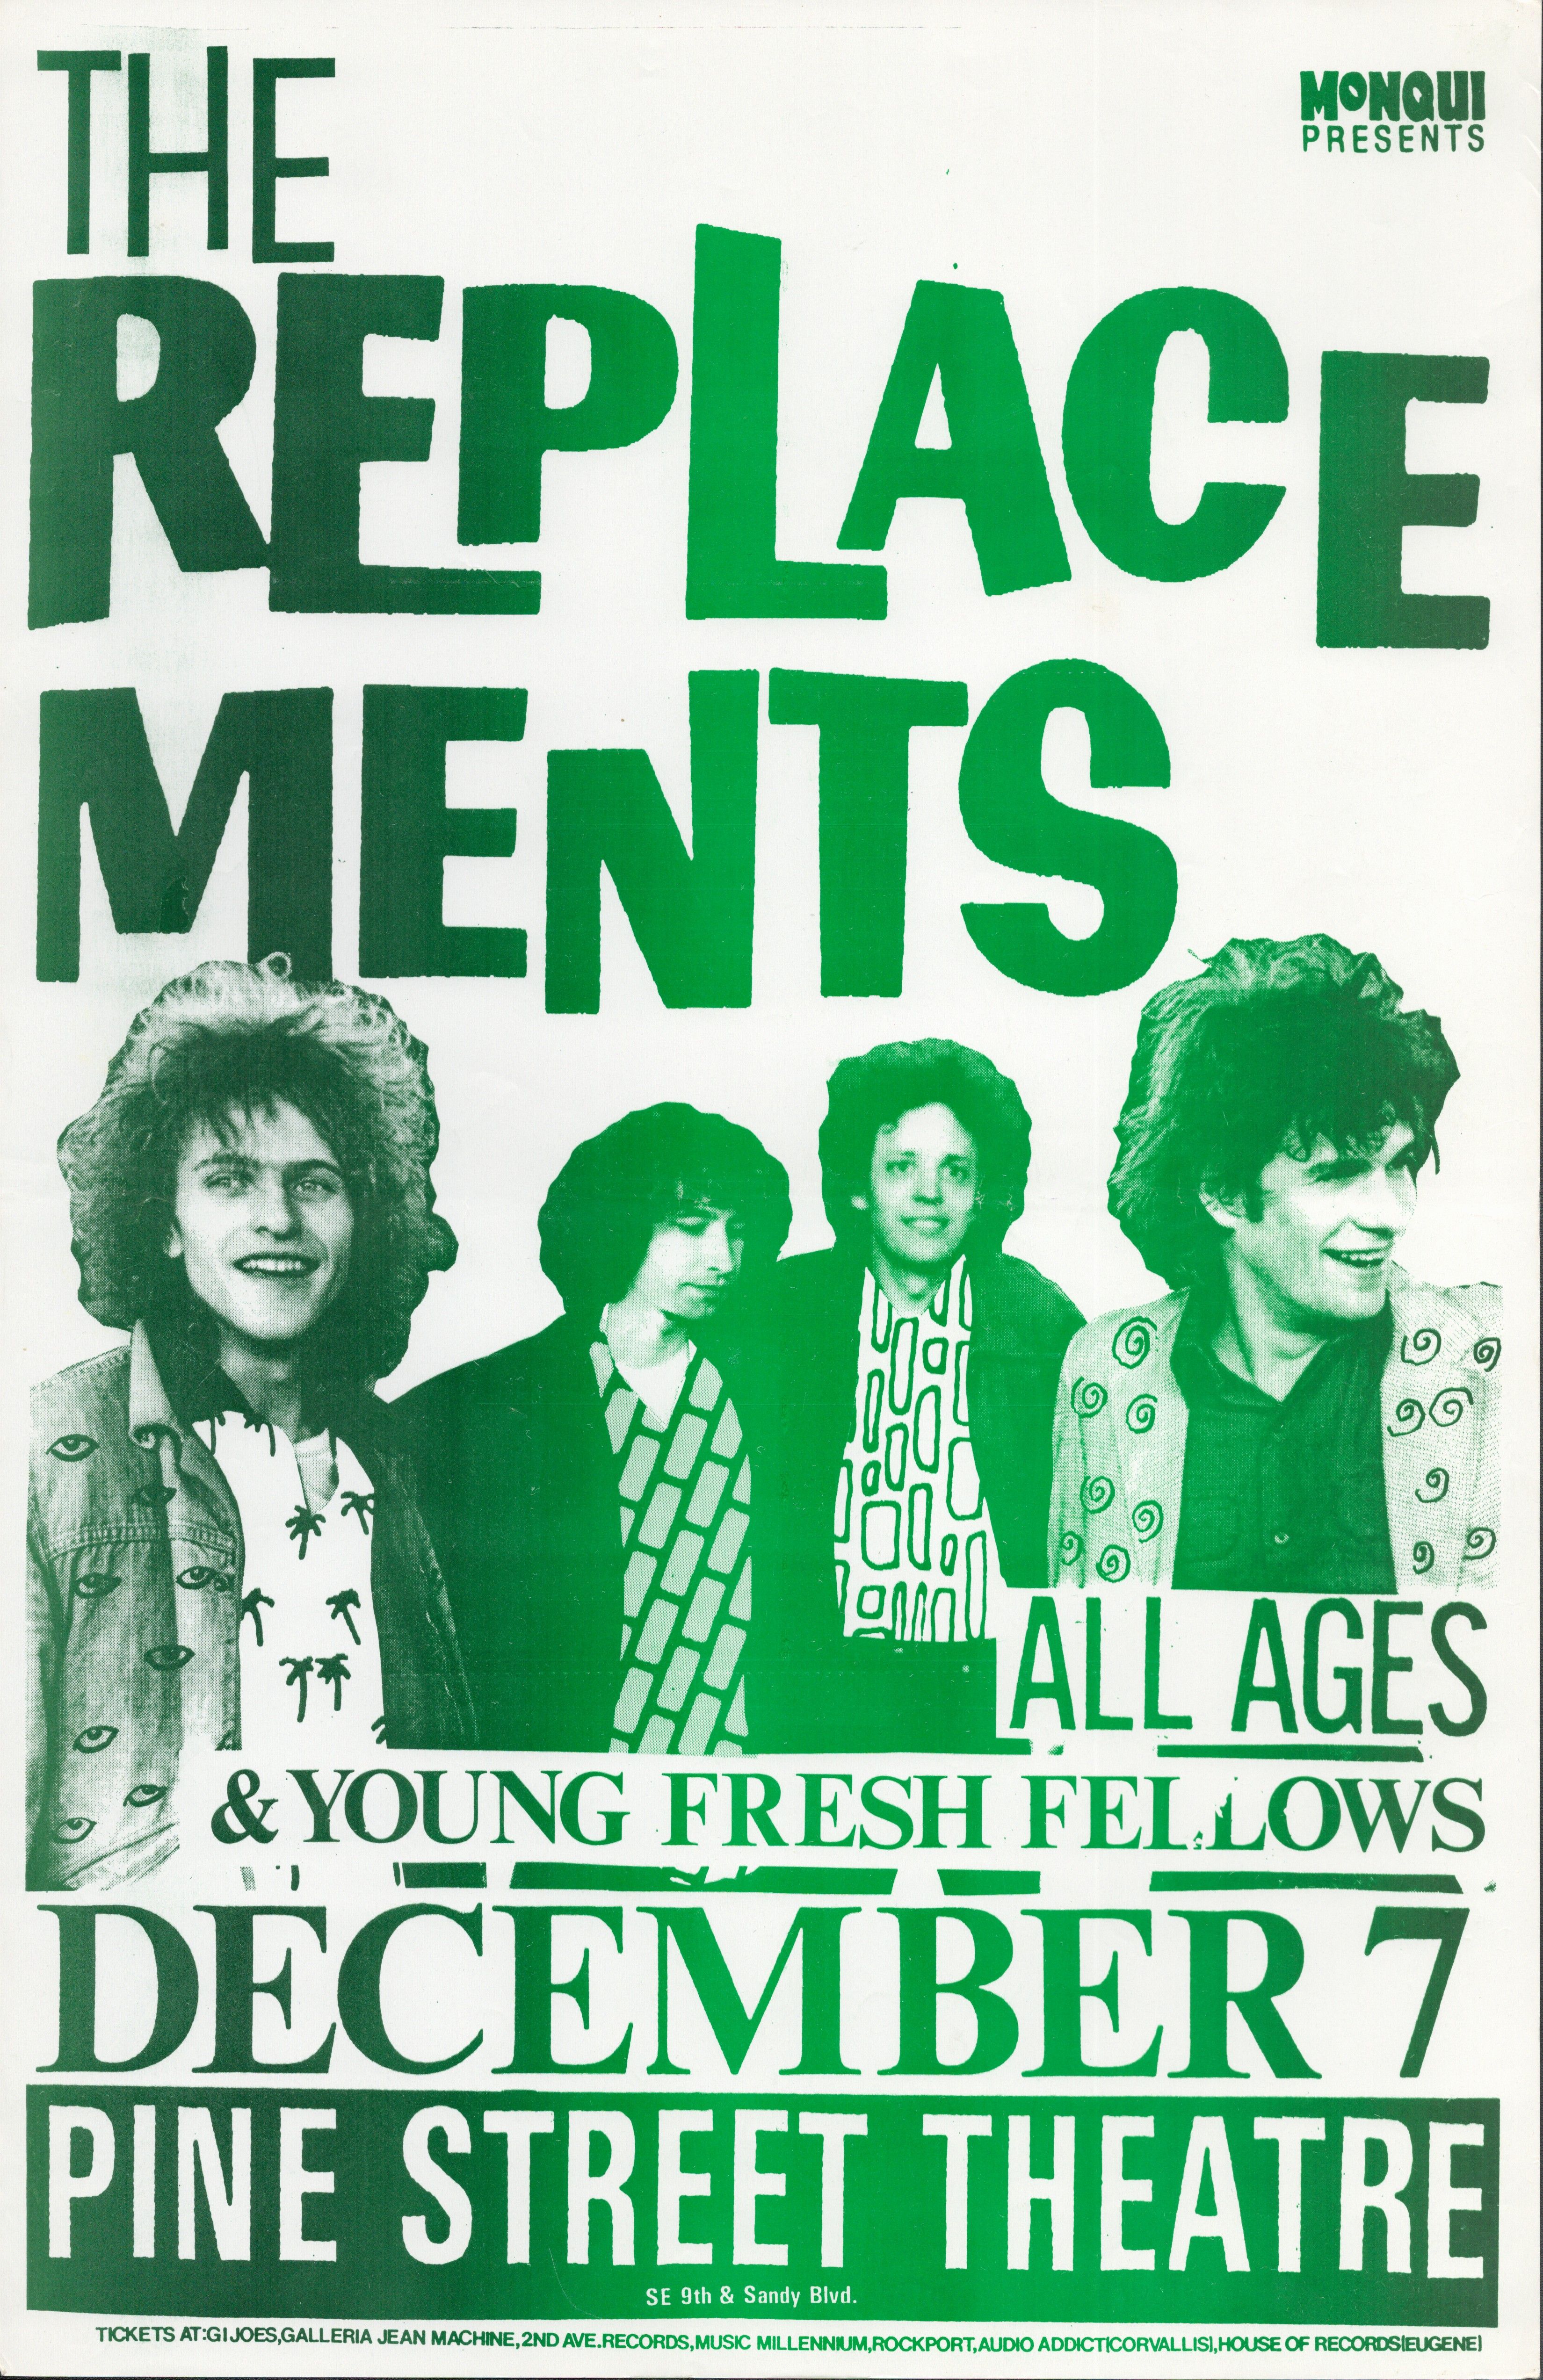 MXP-94.2 The Replacements at Pine Street Theatre 1987 Concert Poster